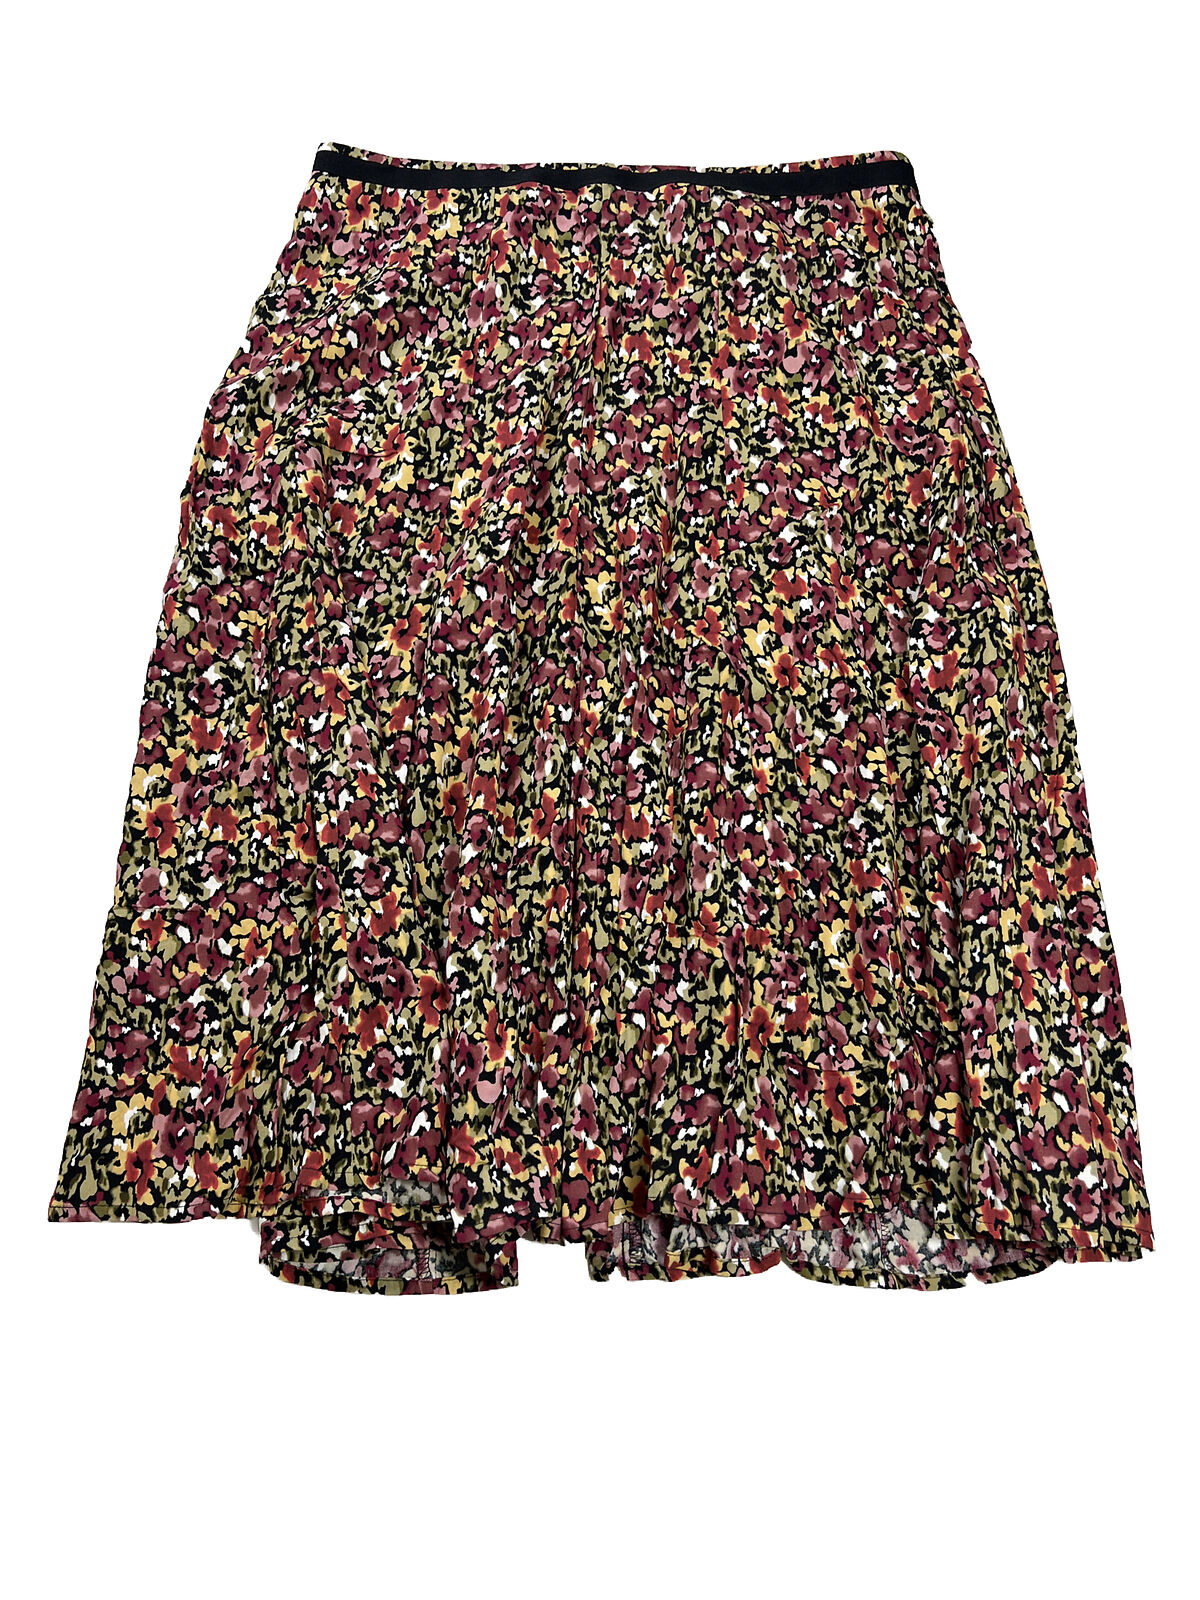 NEW Christopher and Banks Women's Red/Black Floral Flare Skirt - 12